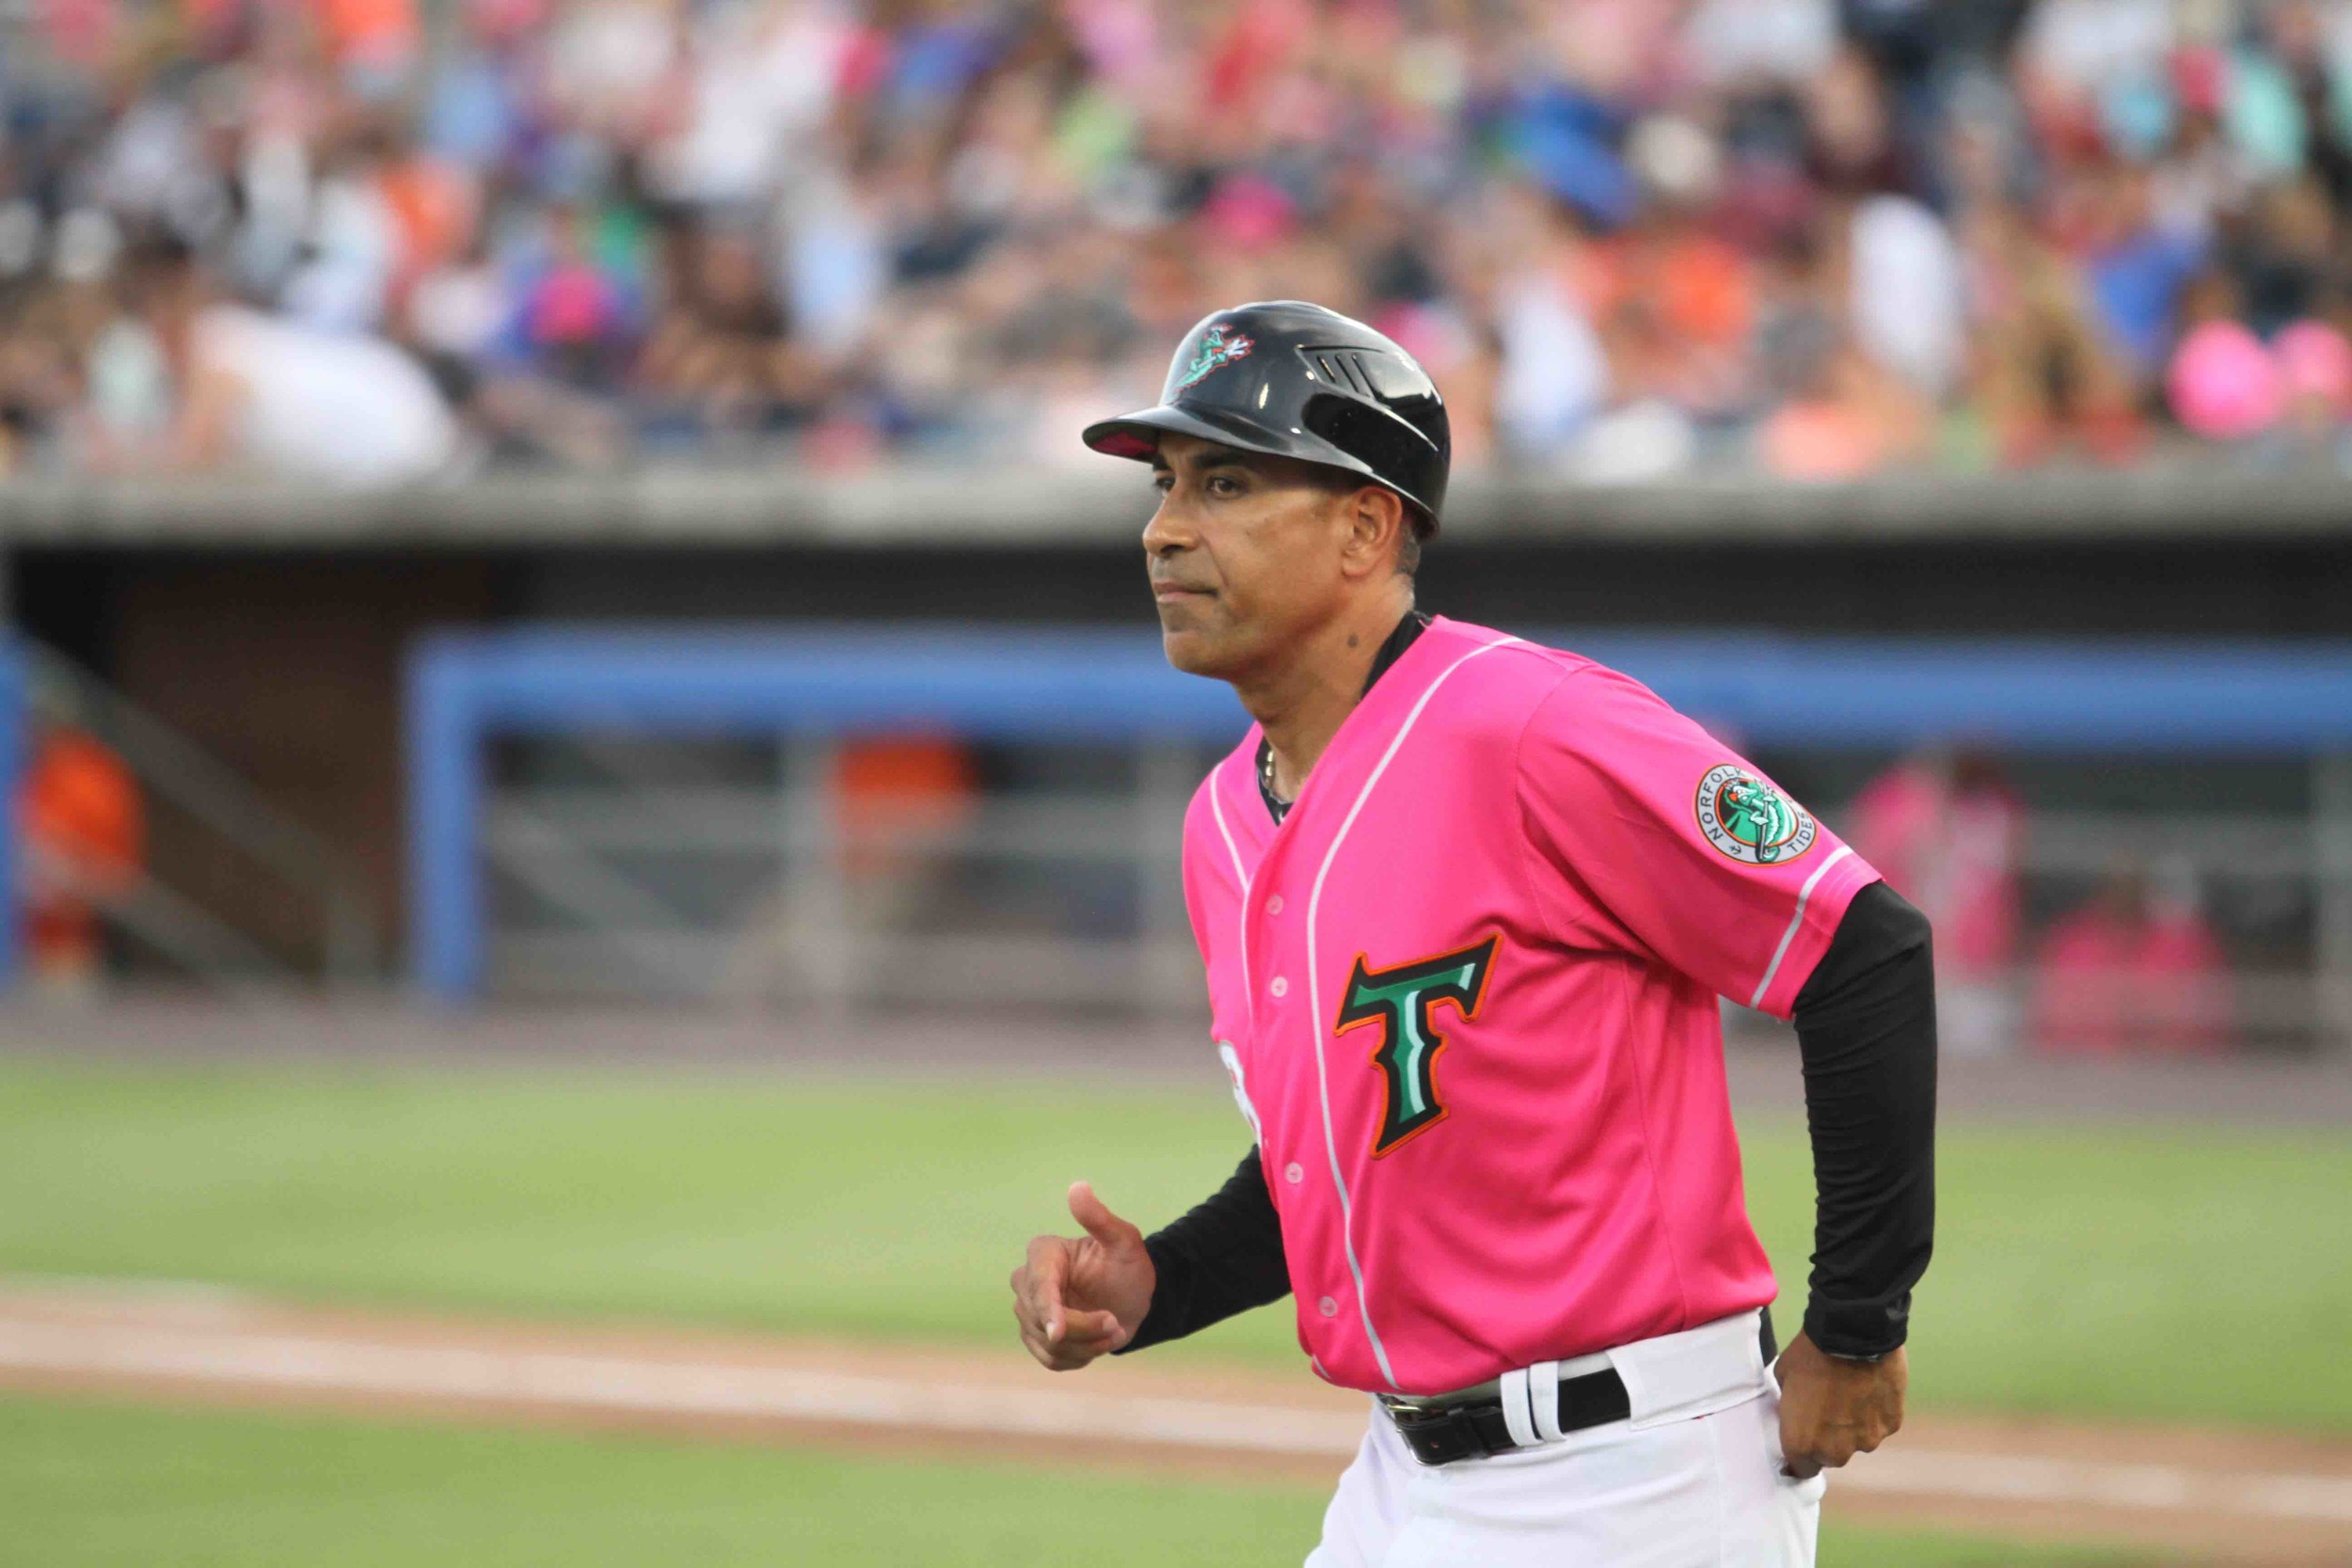 Tides player in pink jersey